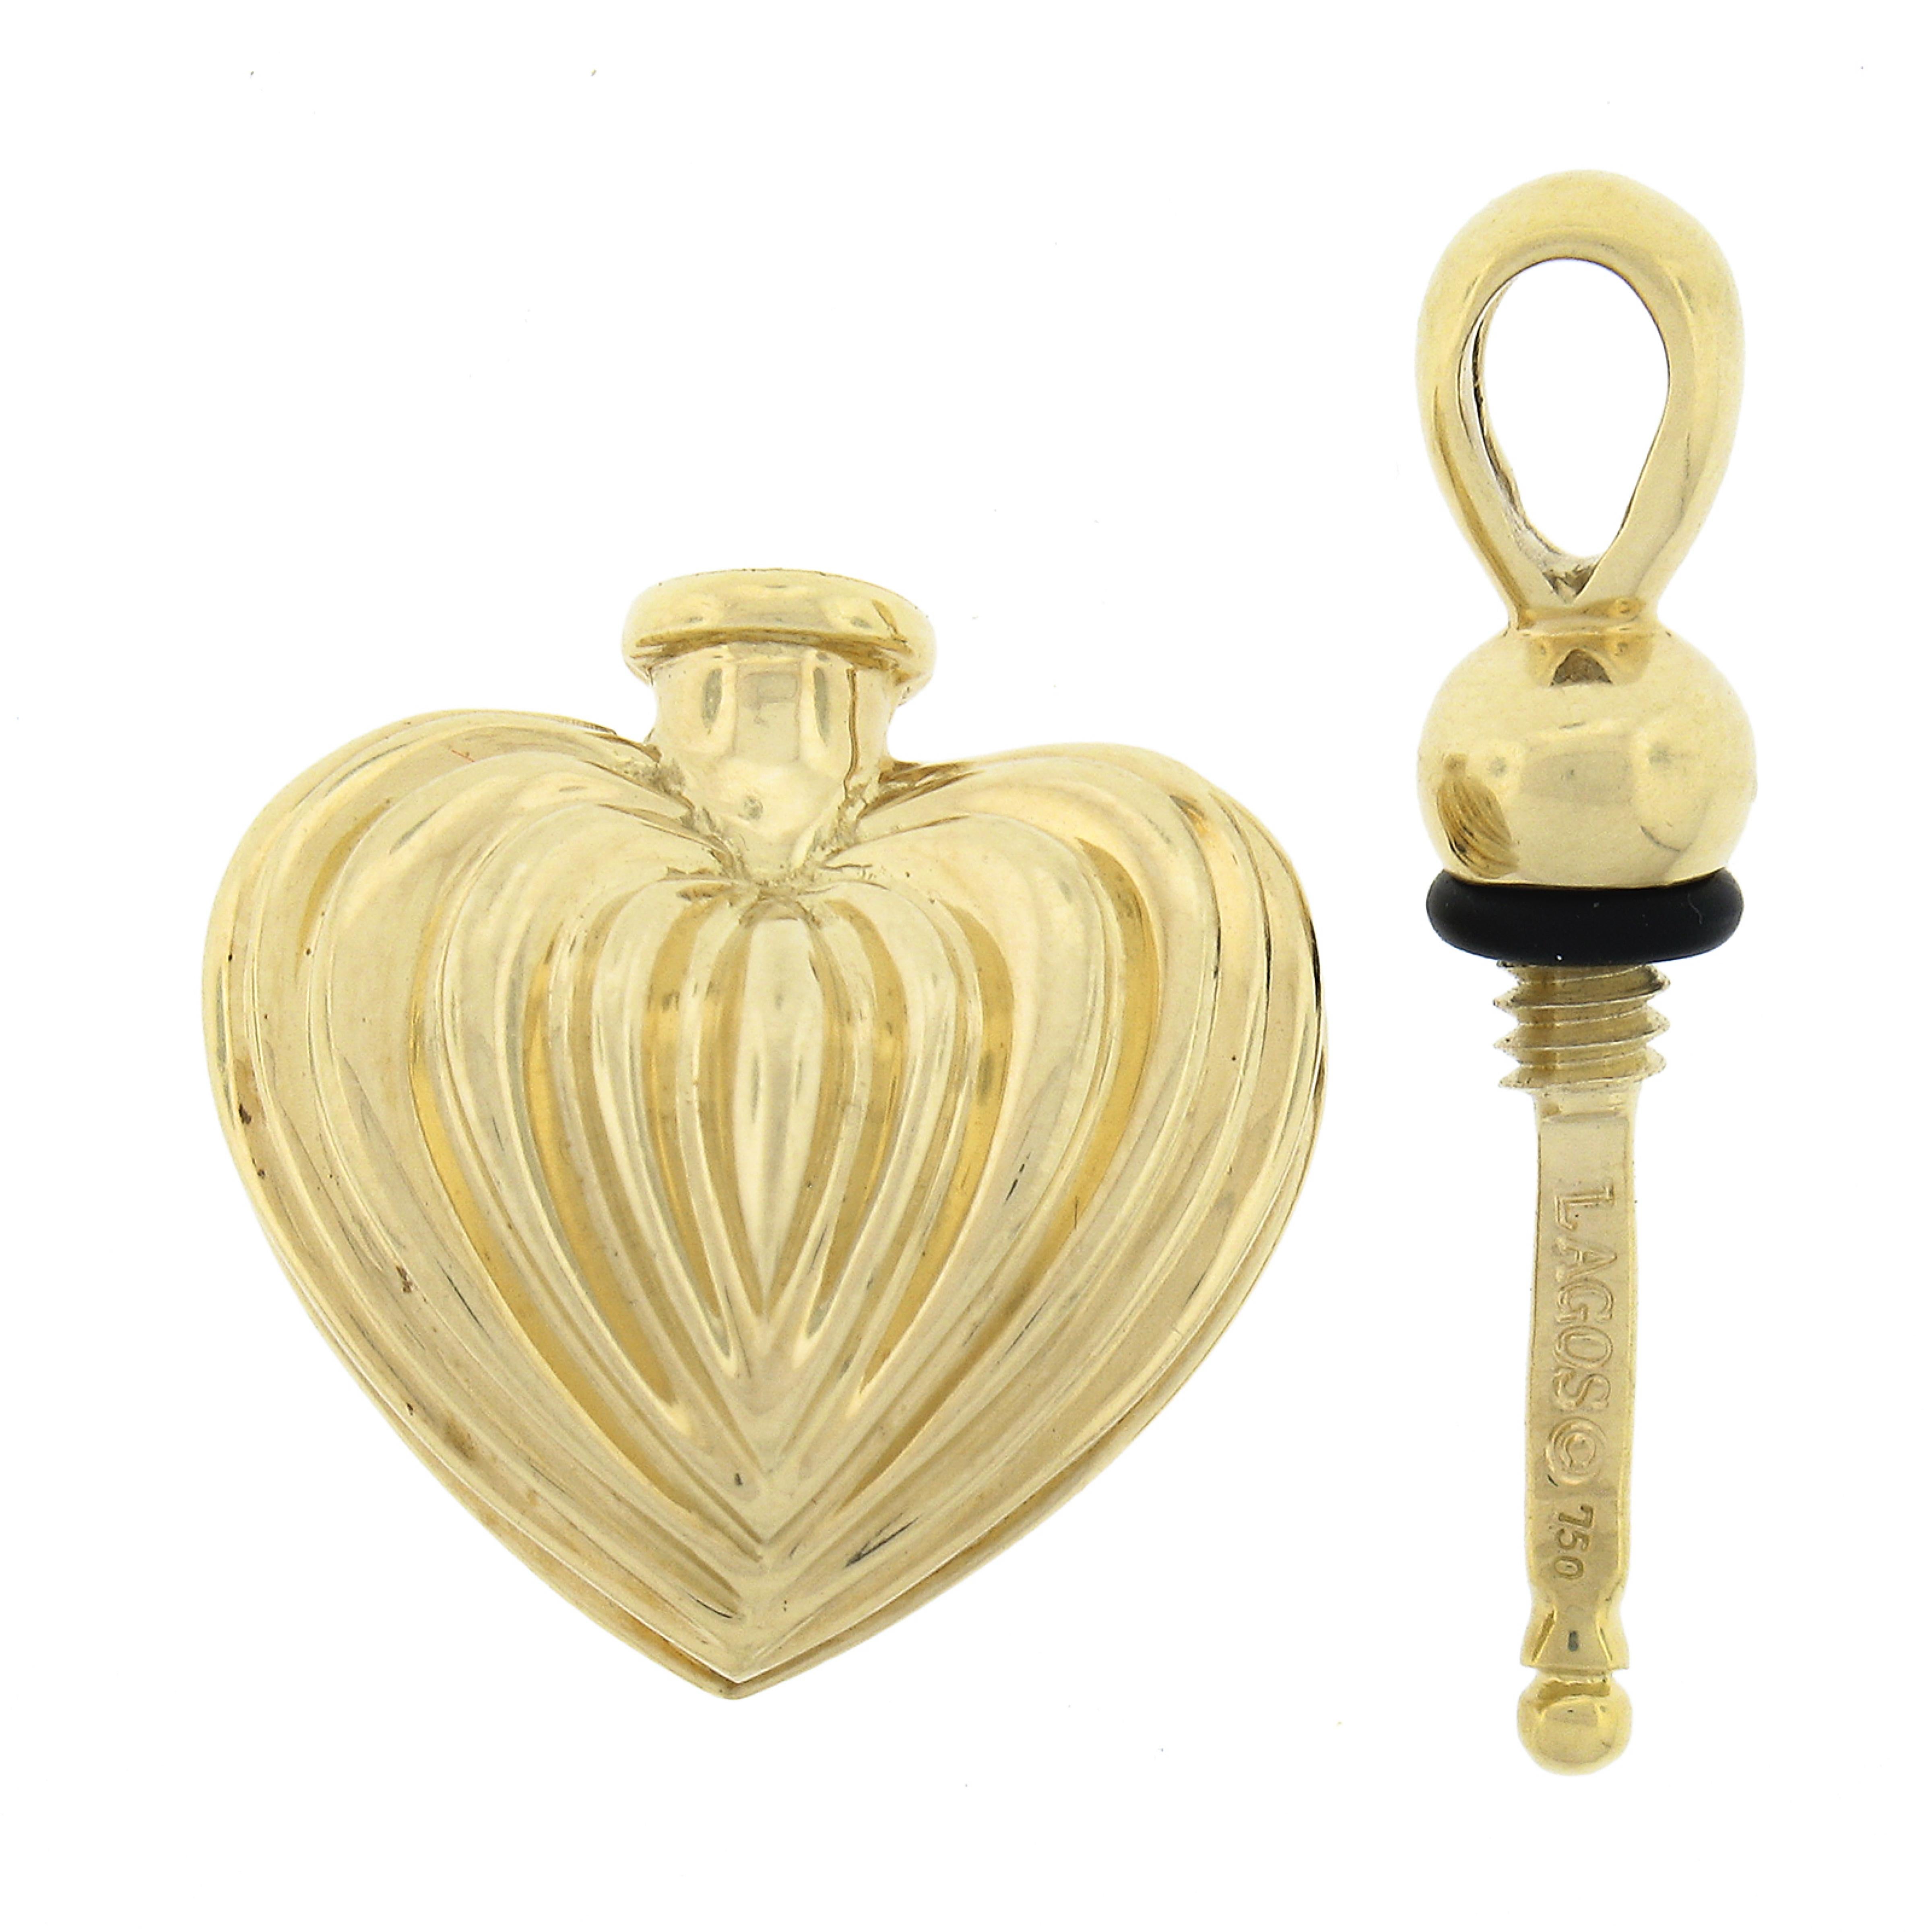 Lagos 18k Yellow Gold Fluted Puffed Heart Perfume Flask Bottle Charm Pendant In Good Condition For Sale In Montclair, NJ